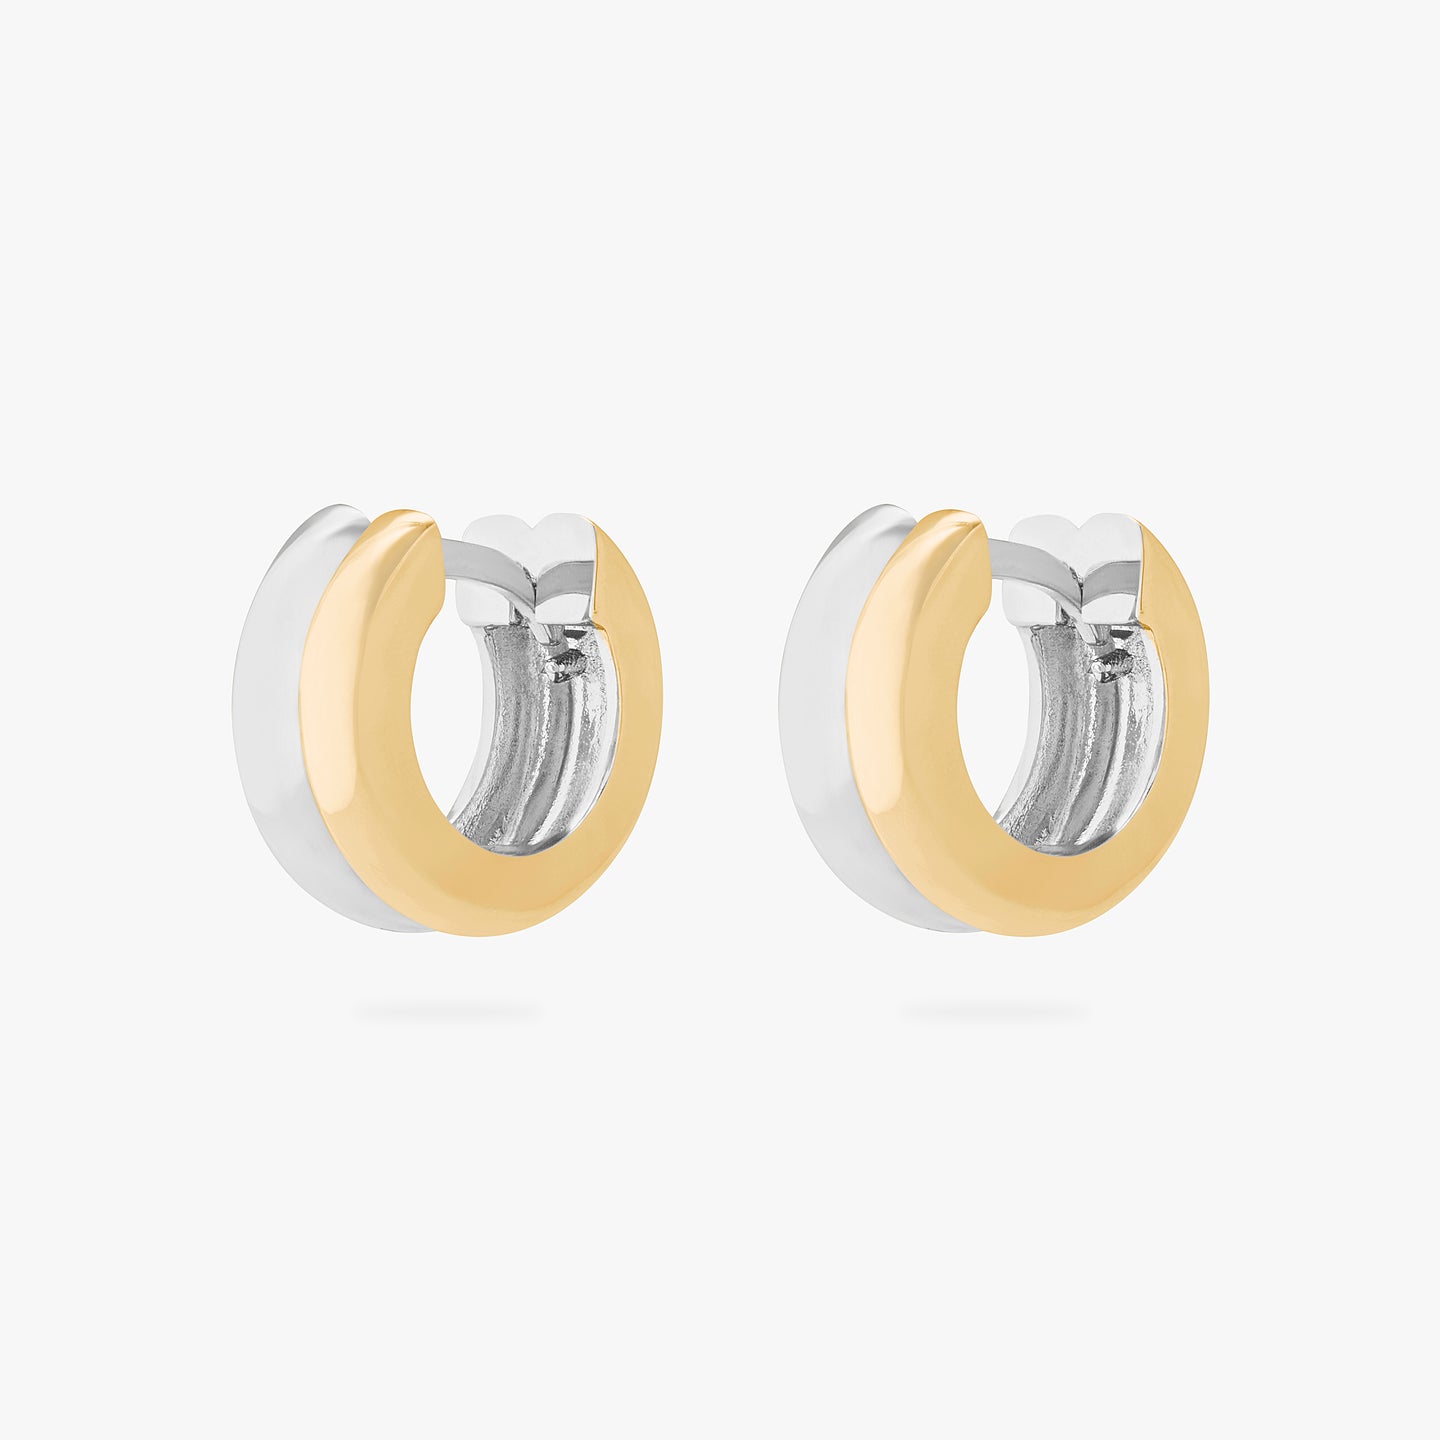 A pair of chunky huggies that are two-toned gold and silver. [pair] color:null|gold/silver